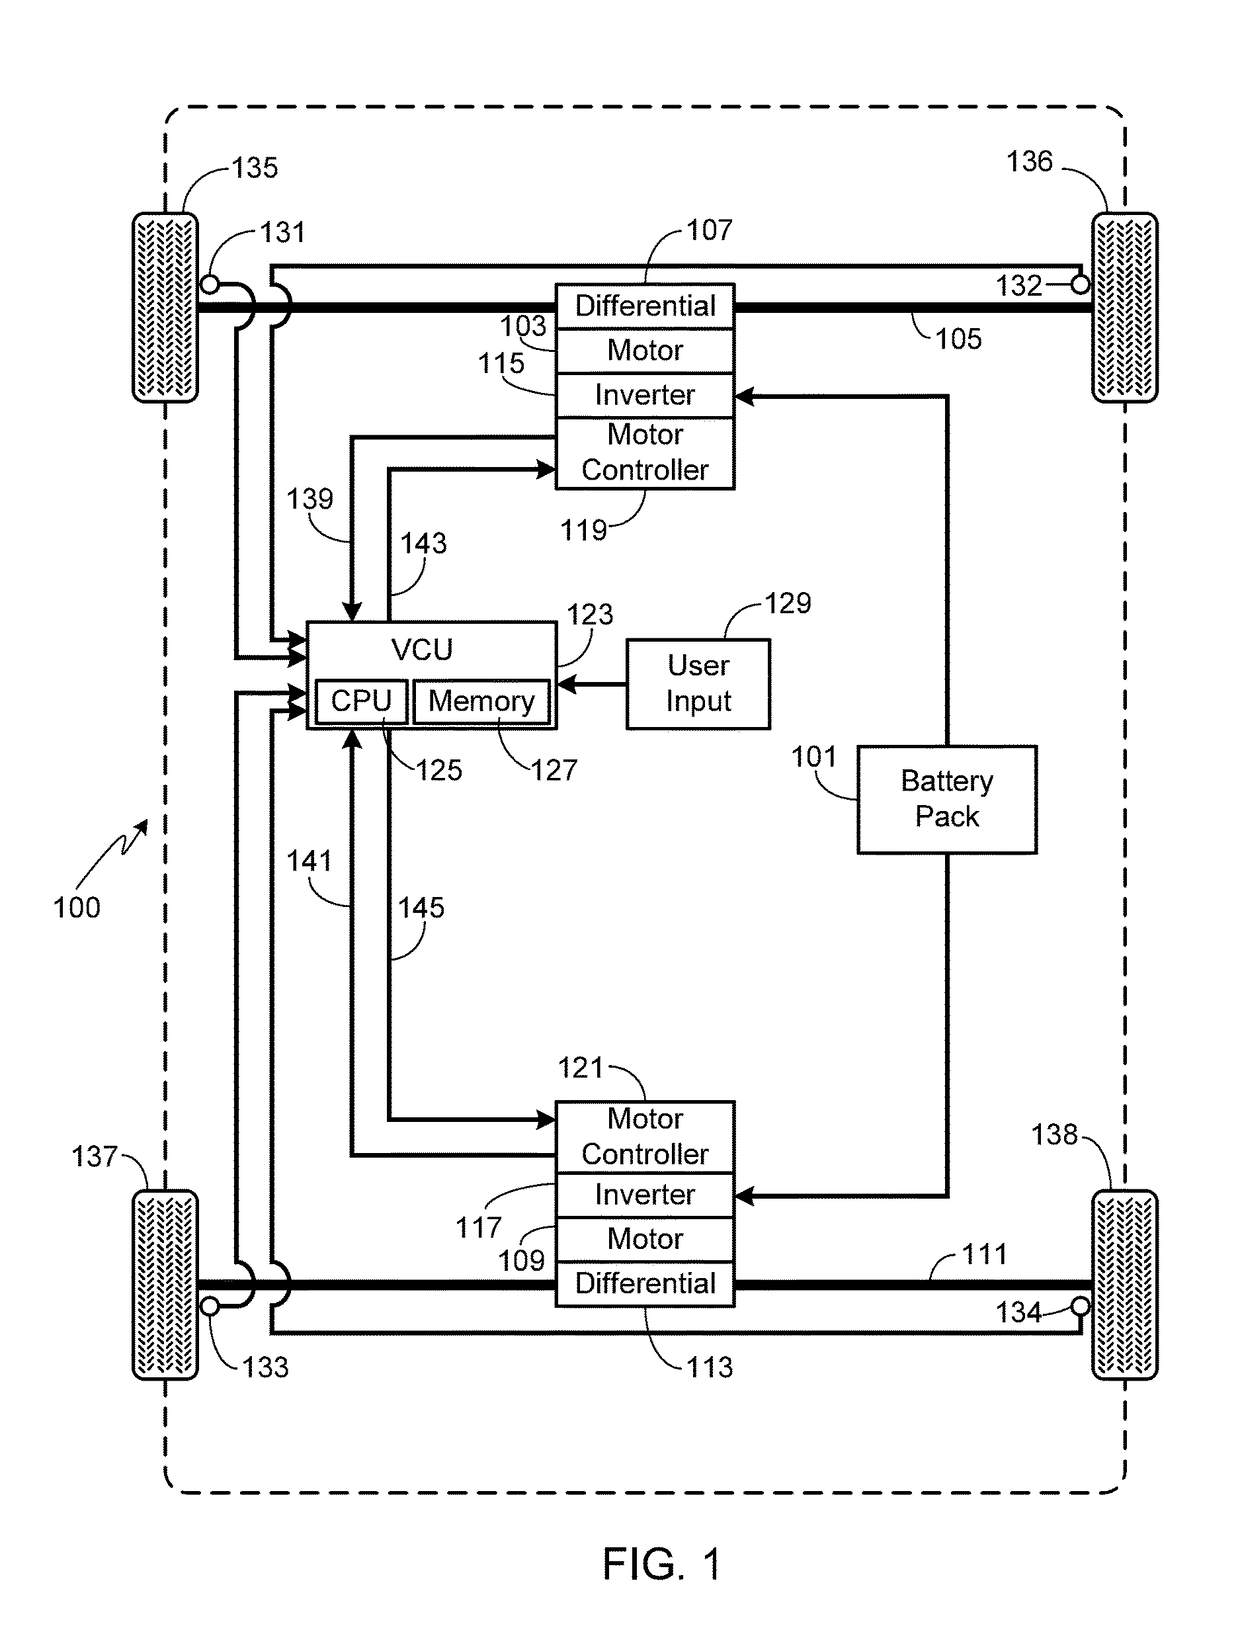 High efficiency, high power density drive system utilizing complementary motor assemblies